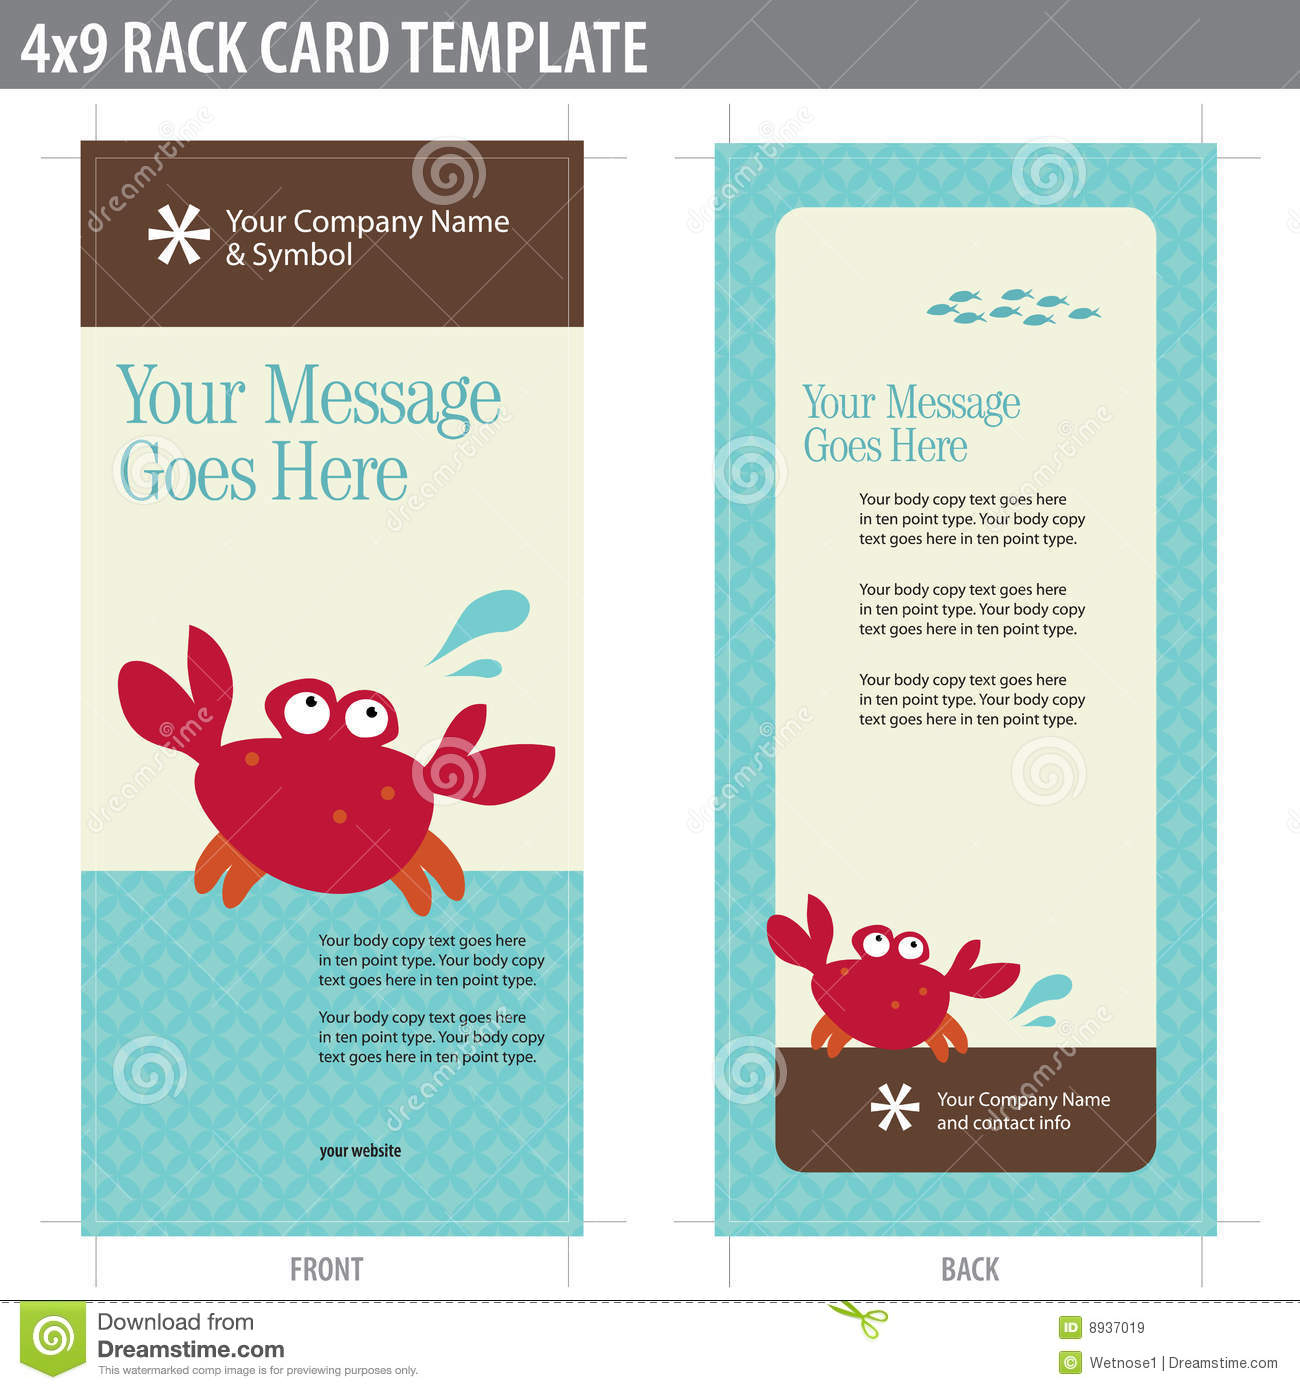 free downloadable rack card template